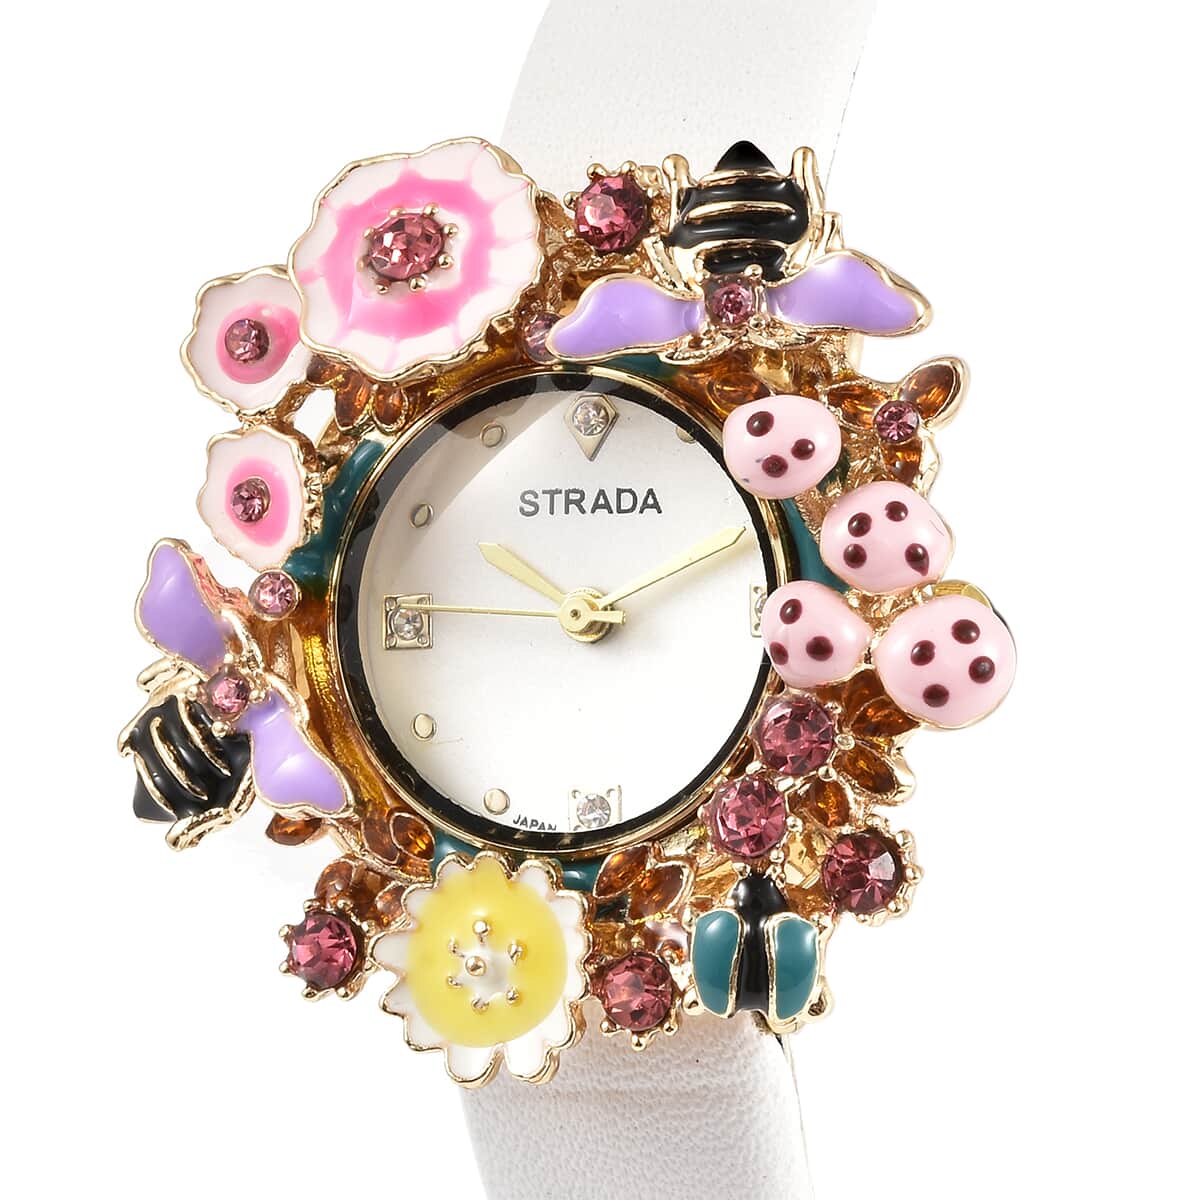 Strada Japanese Movement White & Pink Austrian Crystal, Enameled Flora & Fauna Theme Nature-Inspired Watch with White Faux Leather Strap image number 3